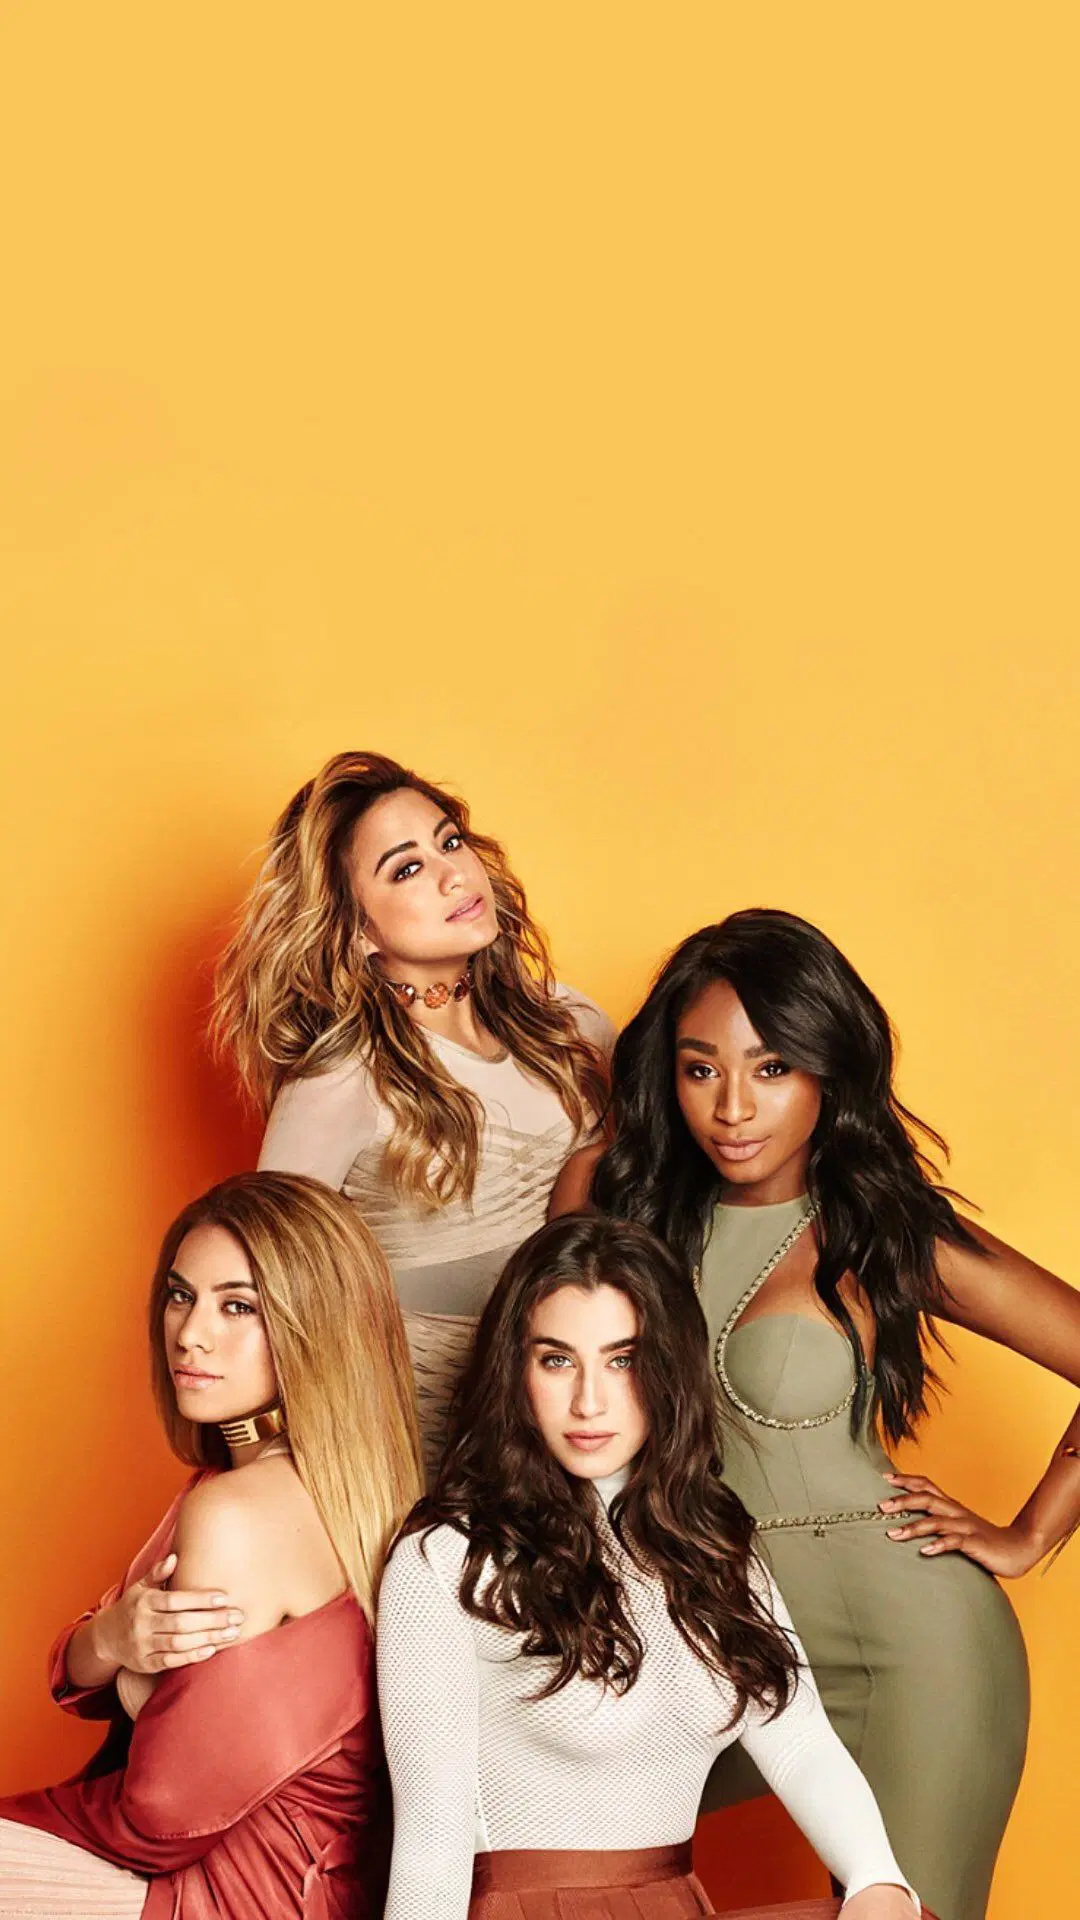 Fifth harmony 2018 wallpaper, Android iPhone HD wallpaper, Background download, High-resolution visuals, 1080x1920 Full HD Phone